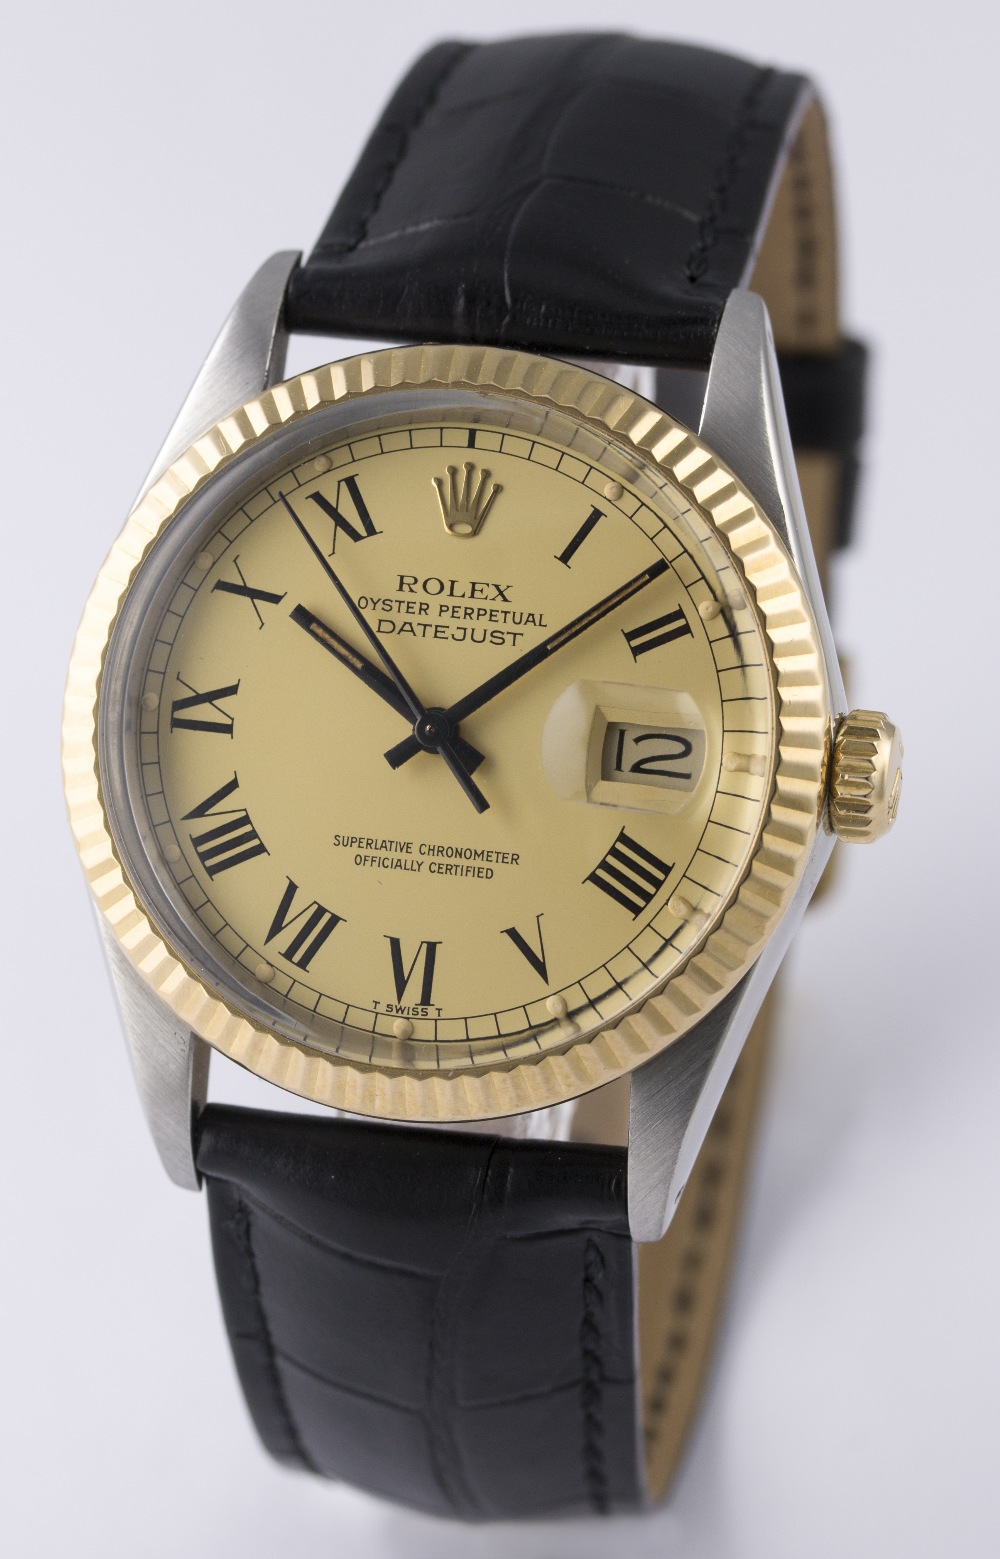 A GENTLEMAN'S STEEL & GOLD ROLEX OYSTER PERPETUAL DATEJUST WRIST WATCH CIRCA 1985, REF. 16013 " - Image 2 of 8